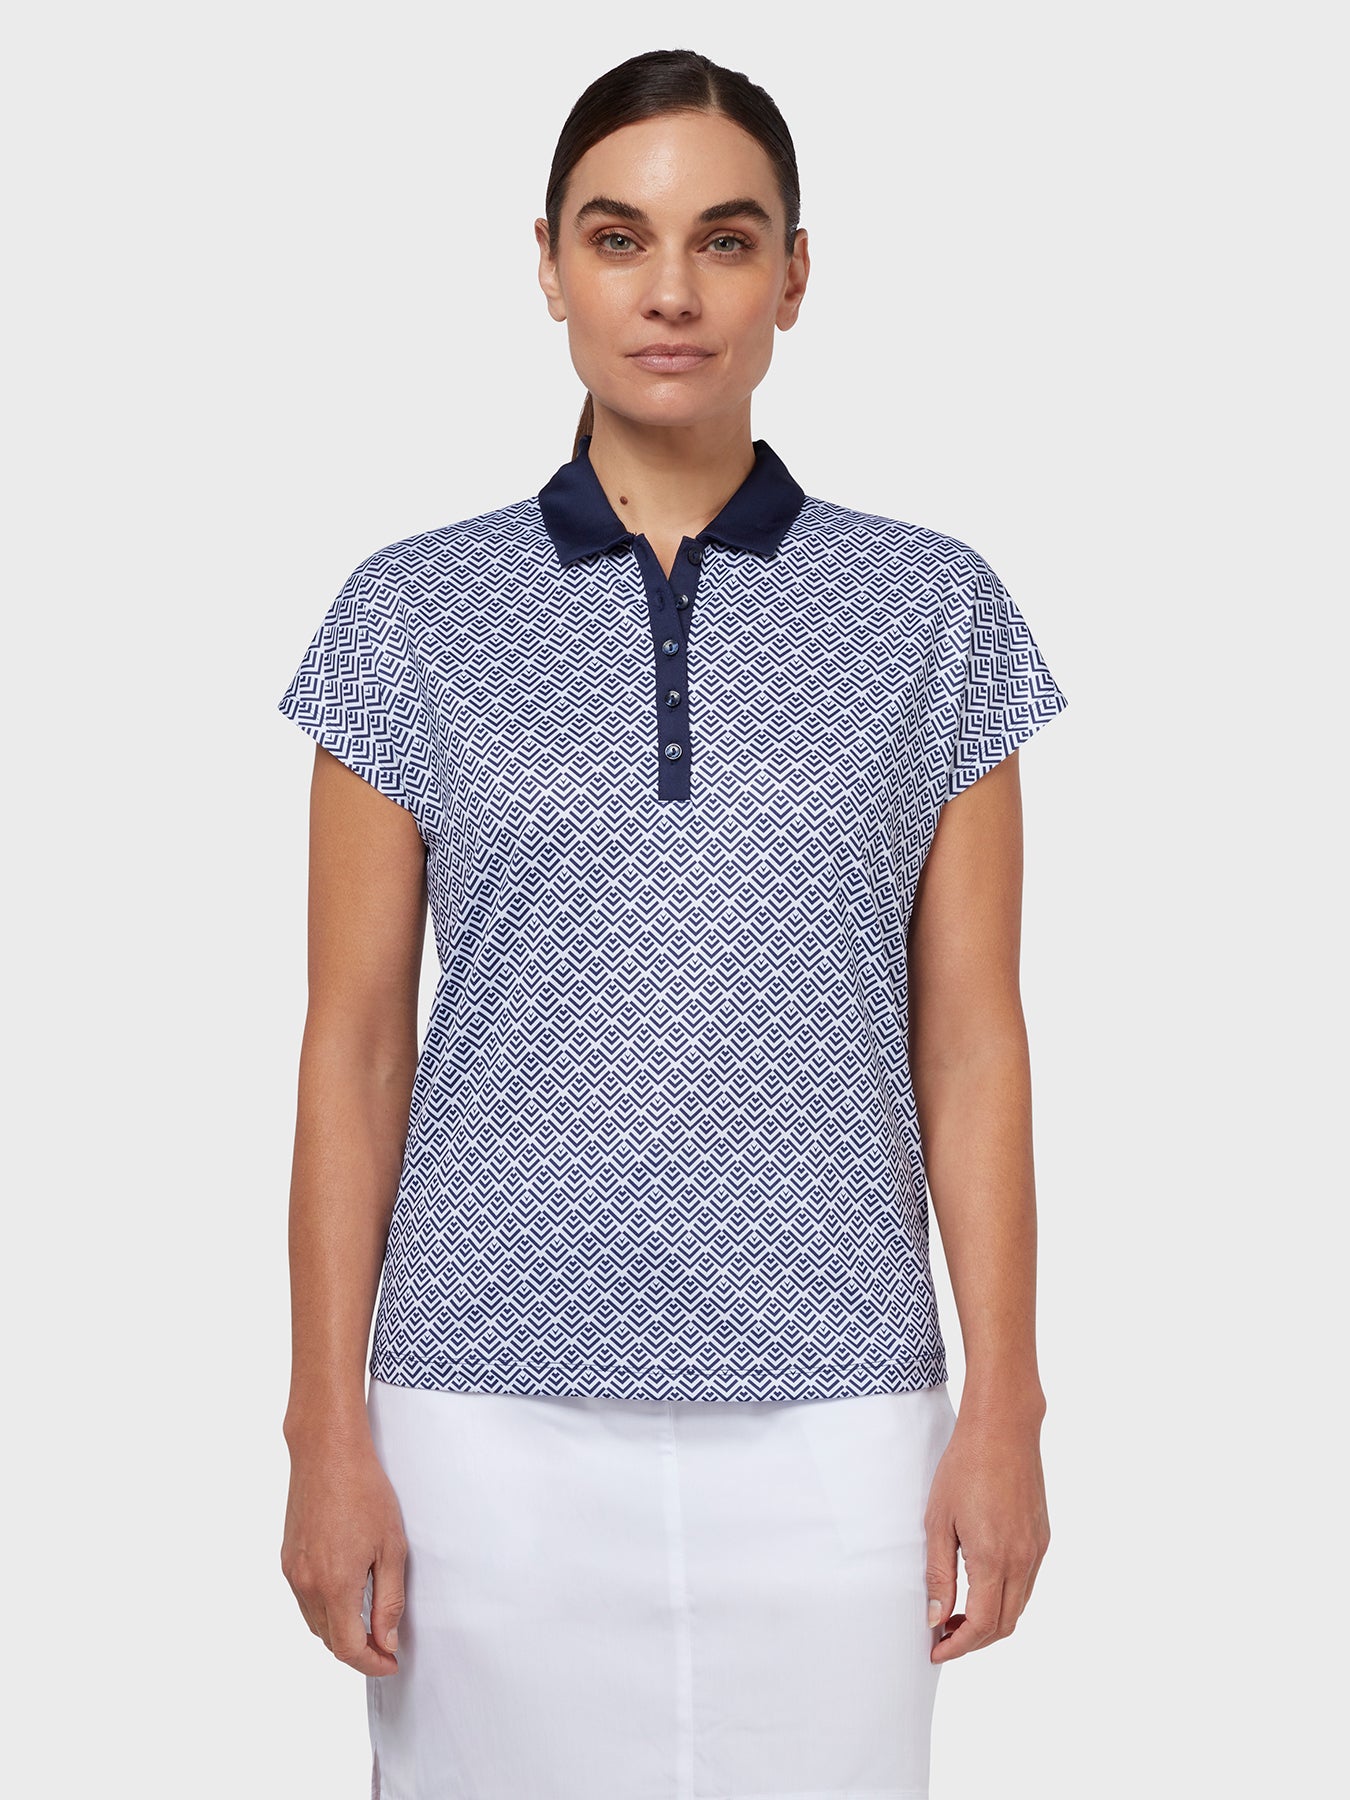 View Chev Printed Womens Polo In Blue Geo Brilliant White M information